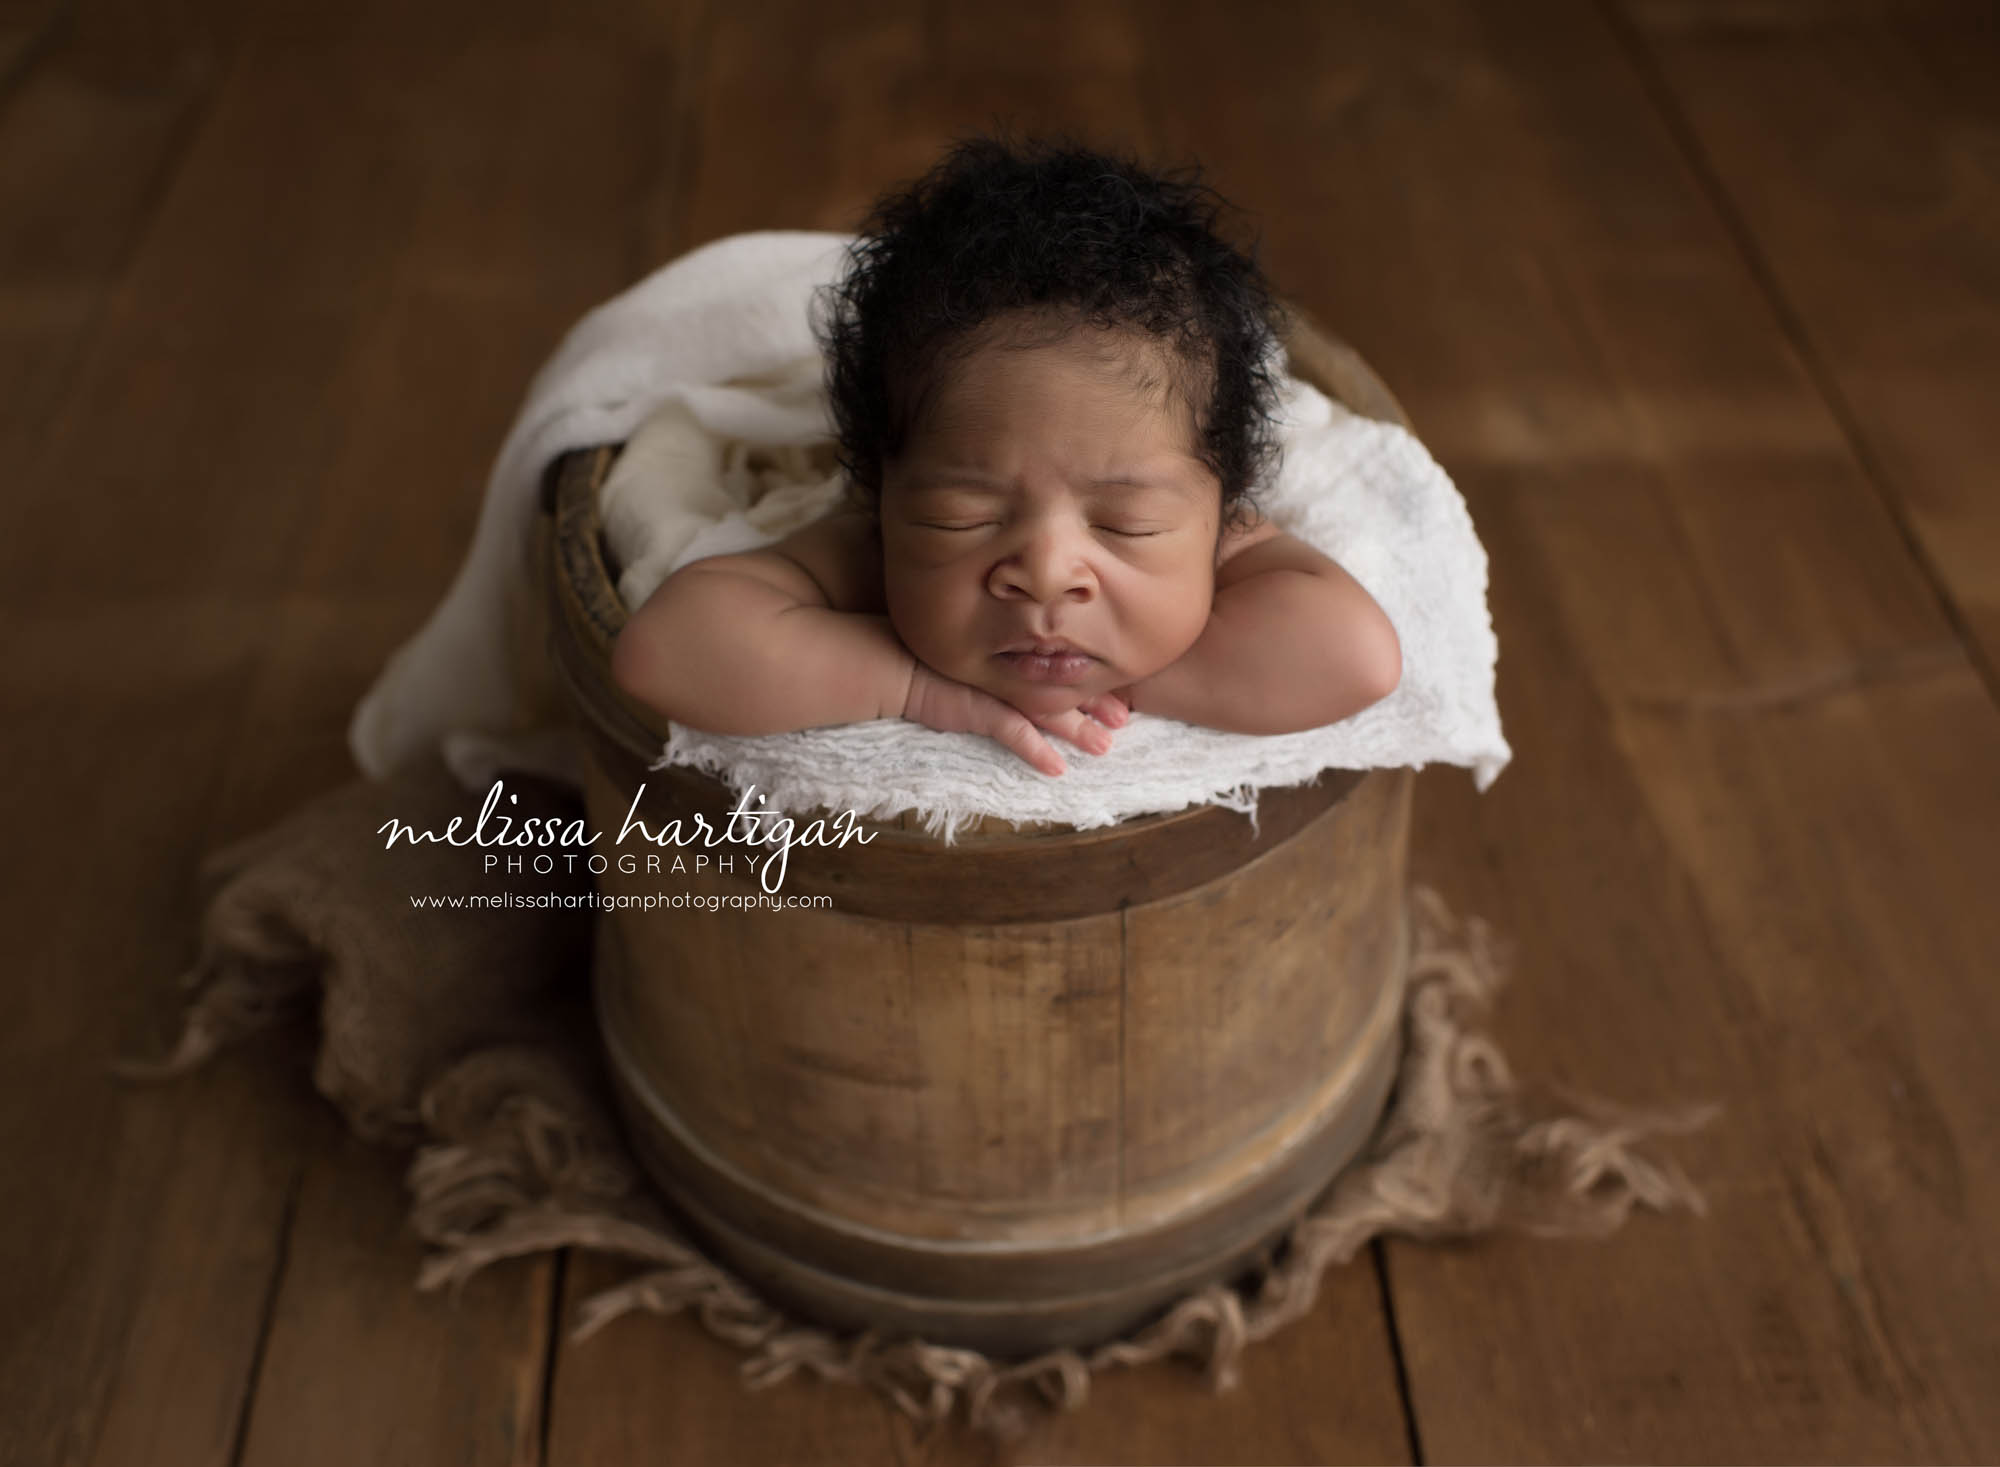 Melissa Hartigan Photography Connecticut Maternity and Newborn CT Photographer Coventry Ct Middlefield CT baby Fairfield county Newborn pose baby boy sleeping in antique wooden bucket with ivory blanket head on crossed arms